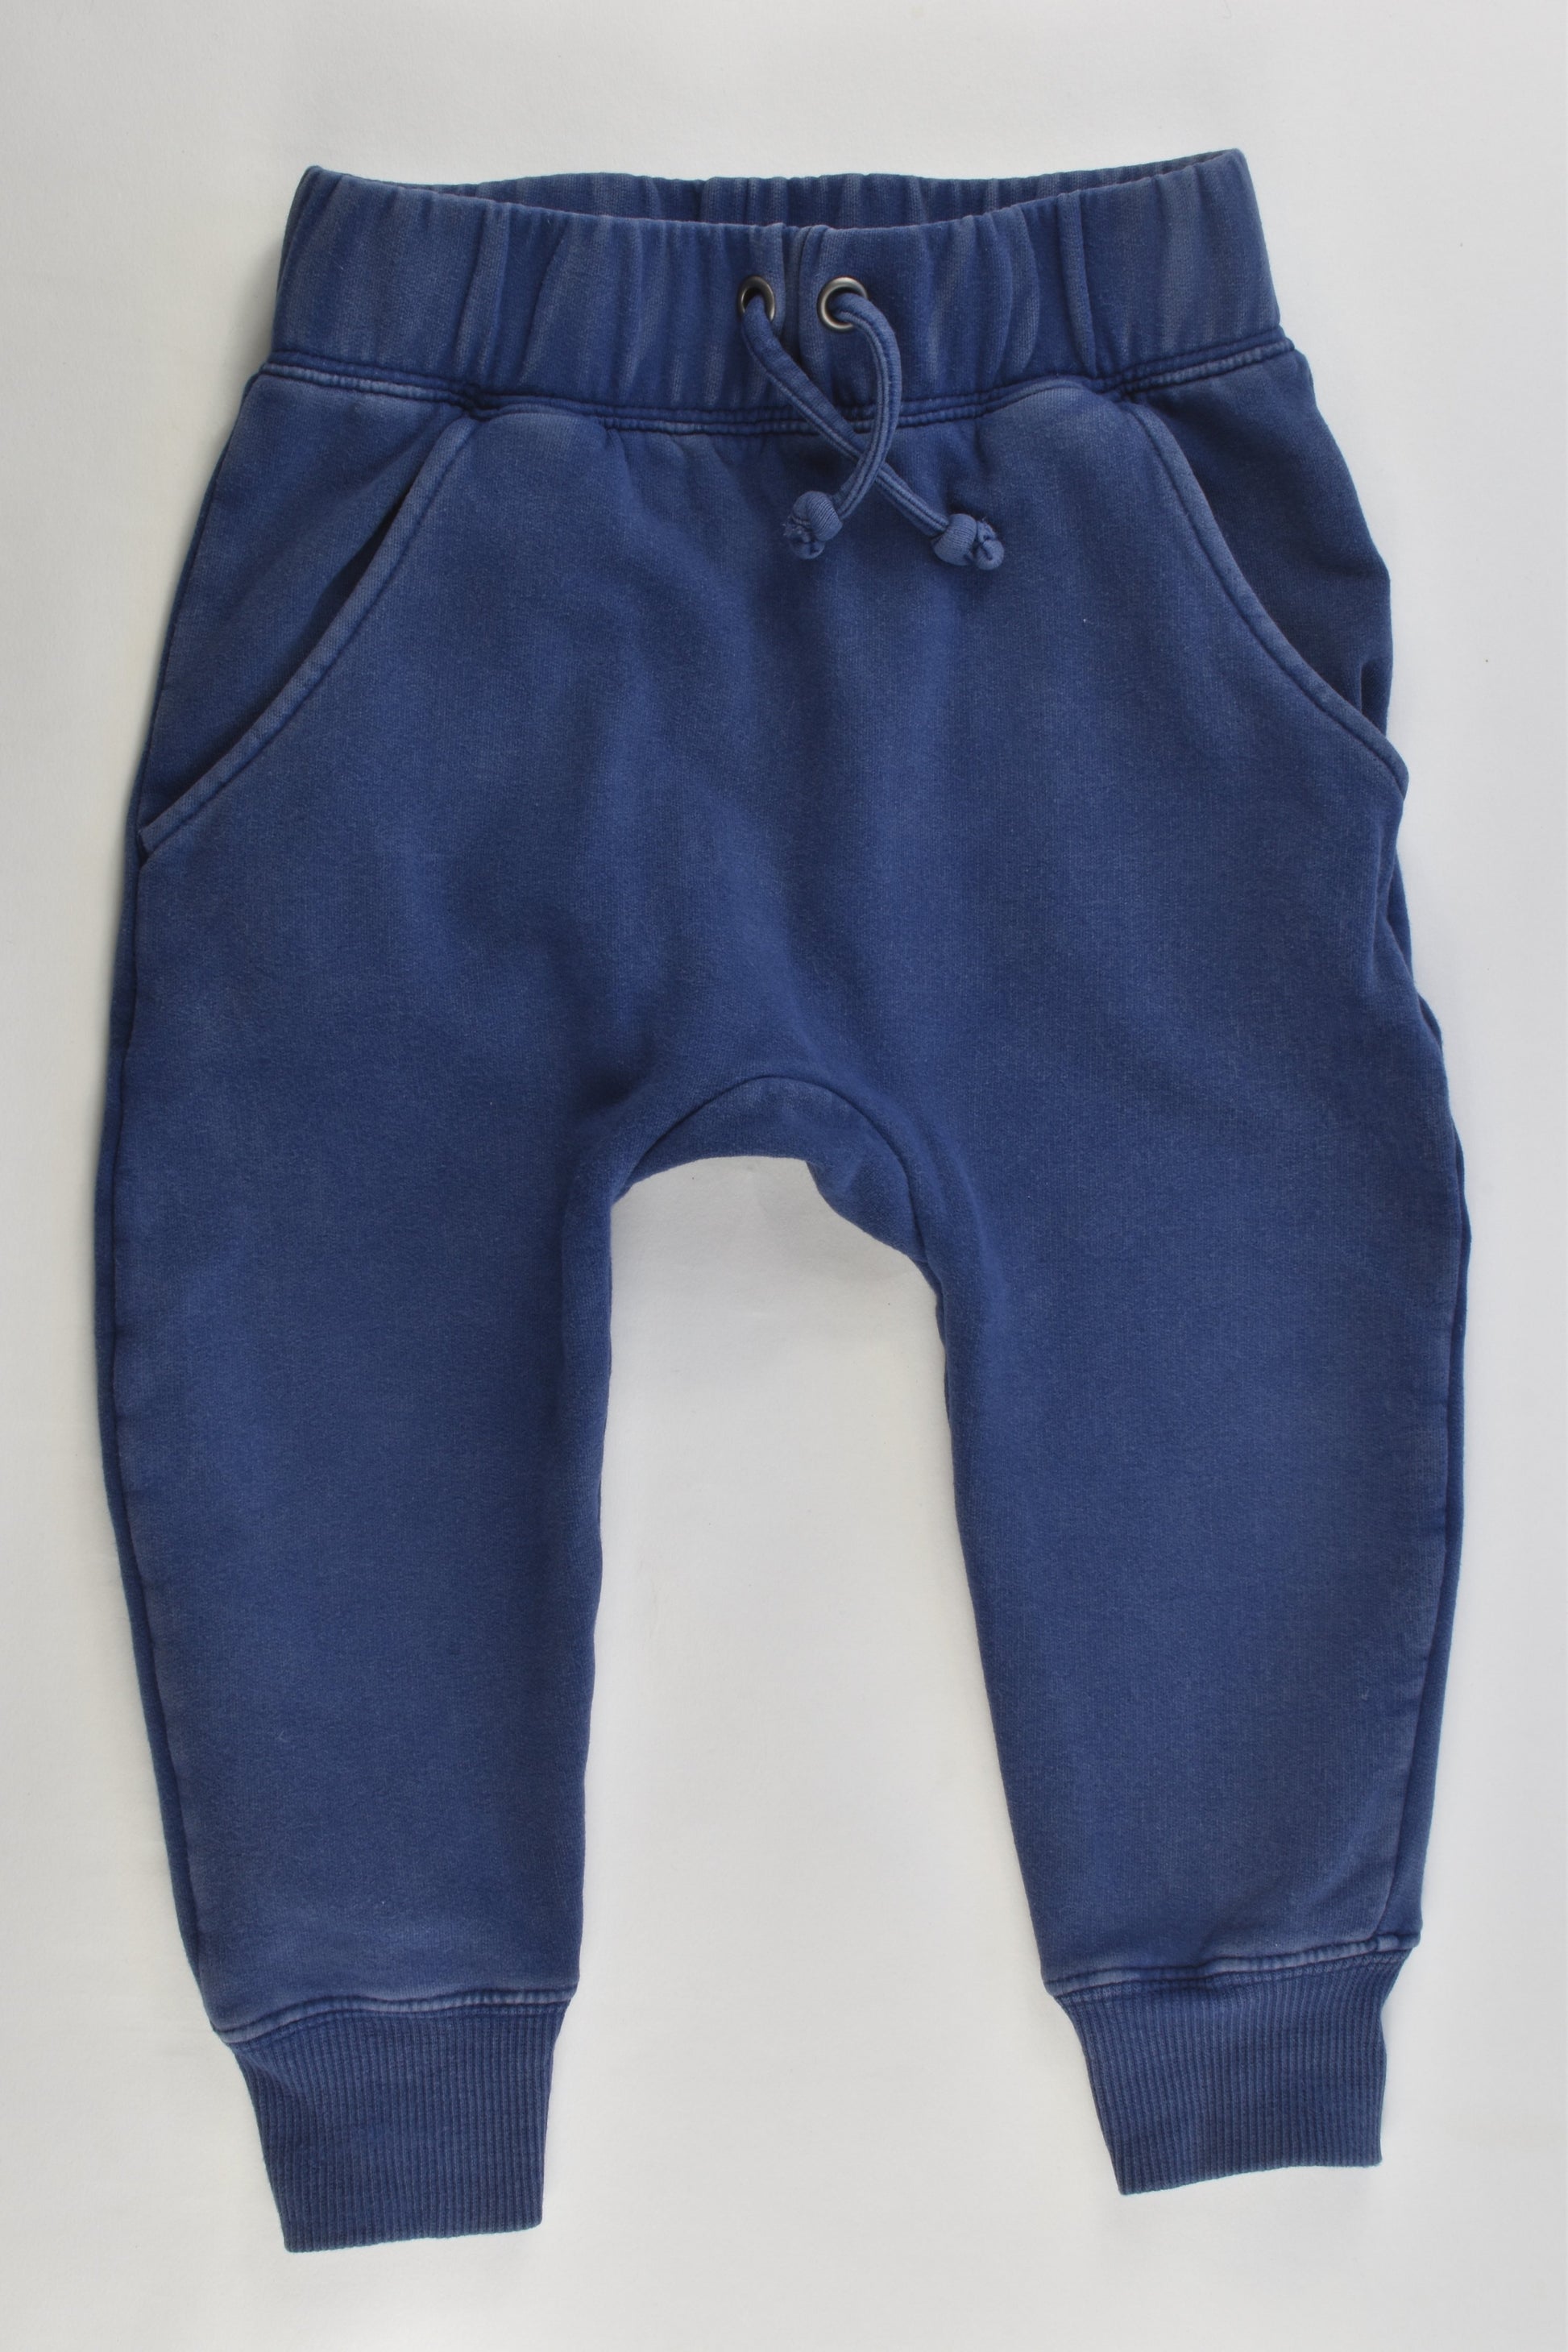 Rock Your Kid Size 2 Track Pants